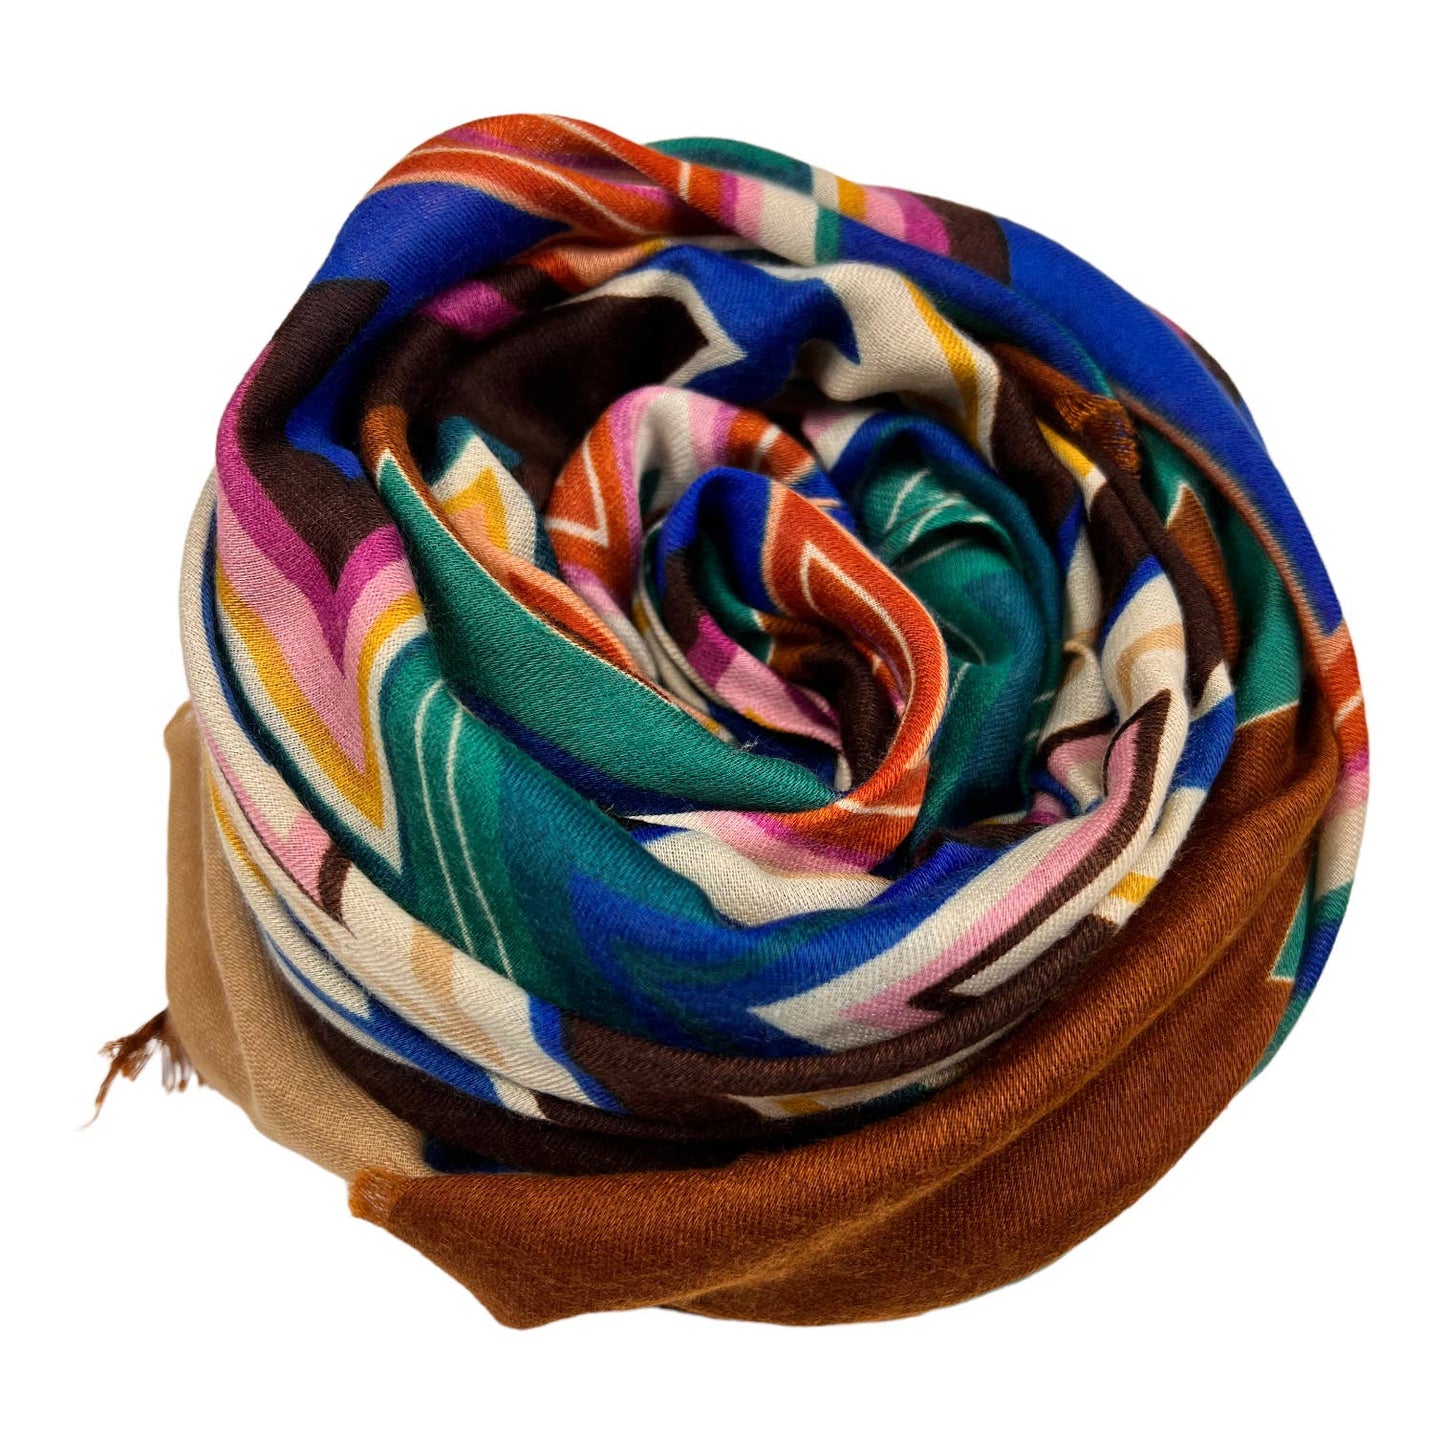 Zigzag Print Colourful Scarf on Cotton Mix Material